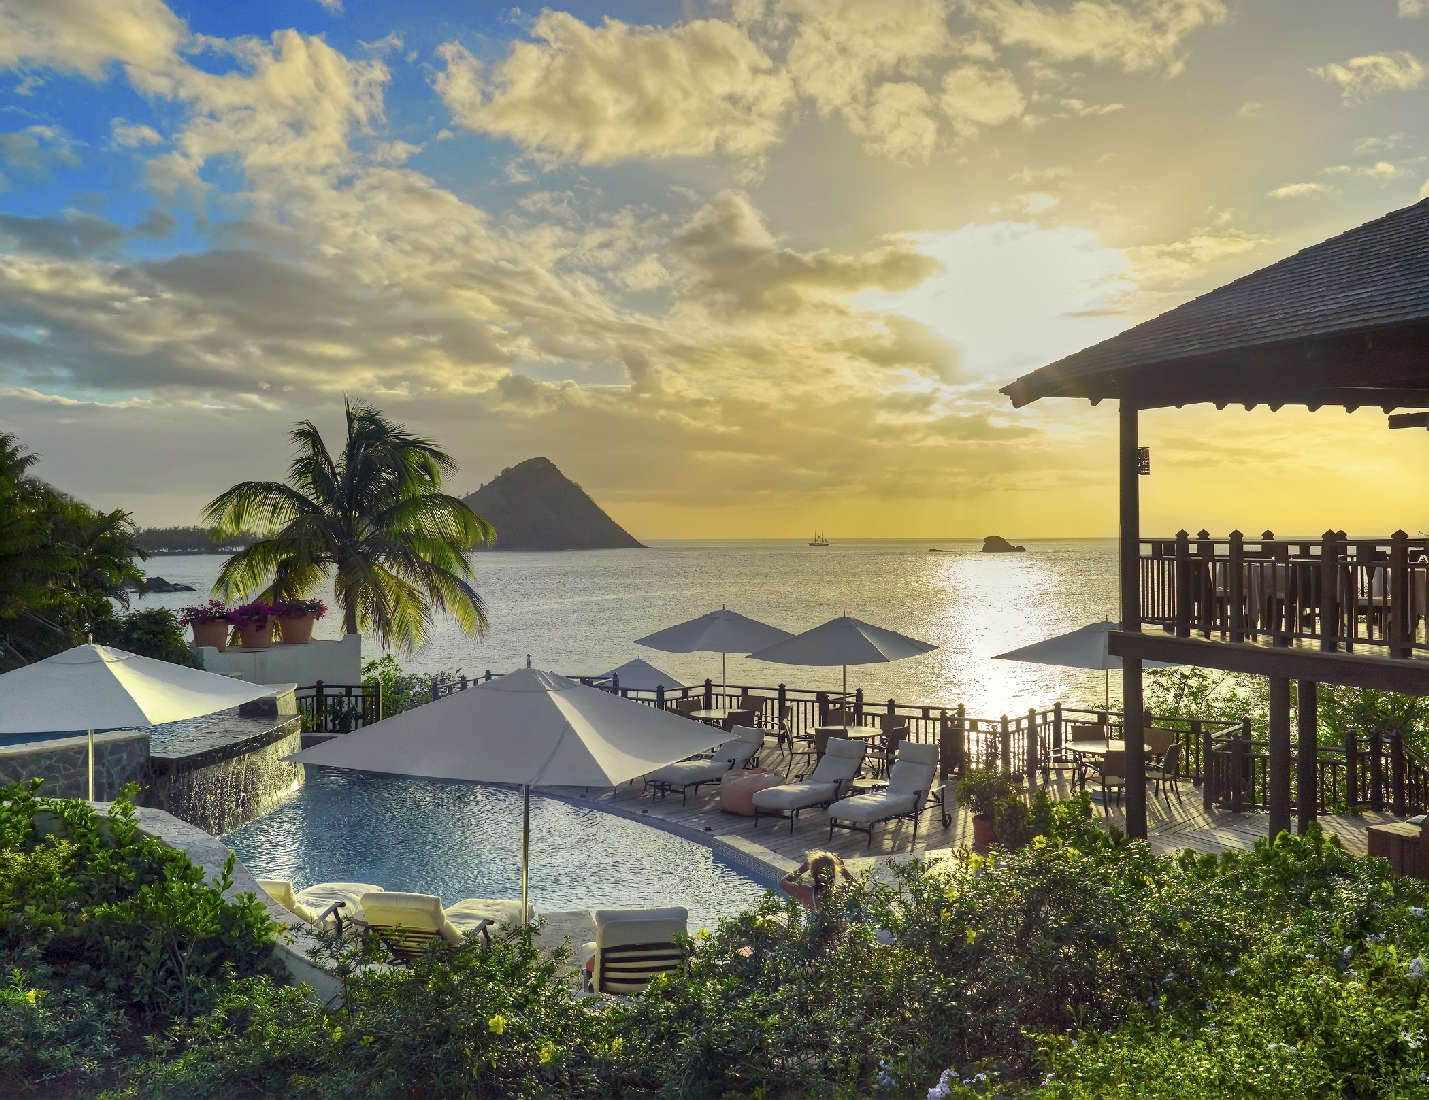 The infinity pool at the bar and restaurant of Cap Maison, St. Lucia